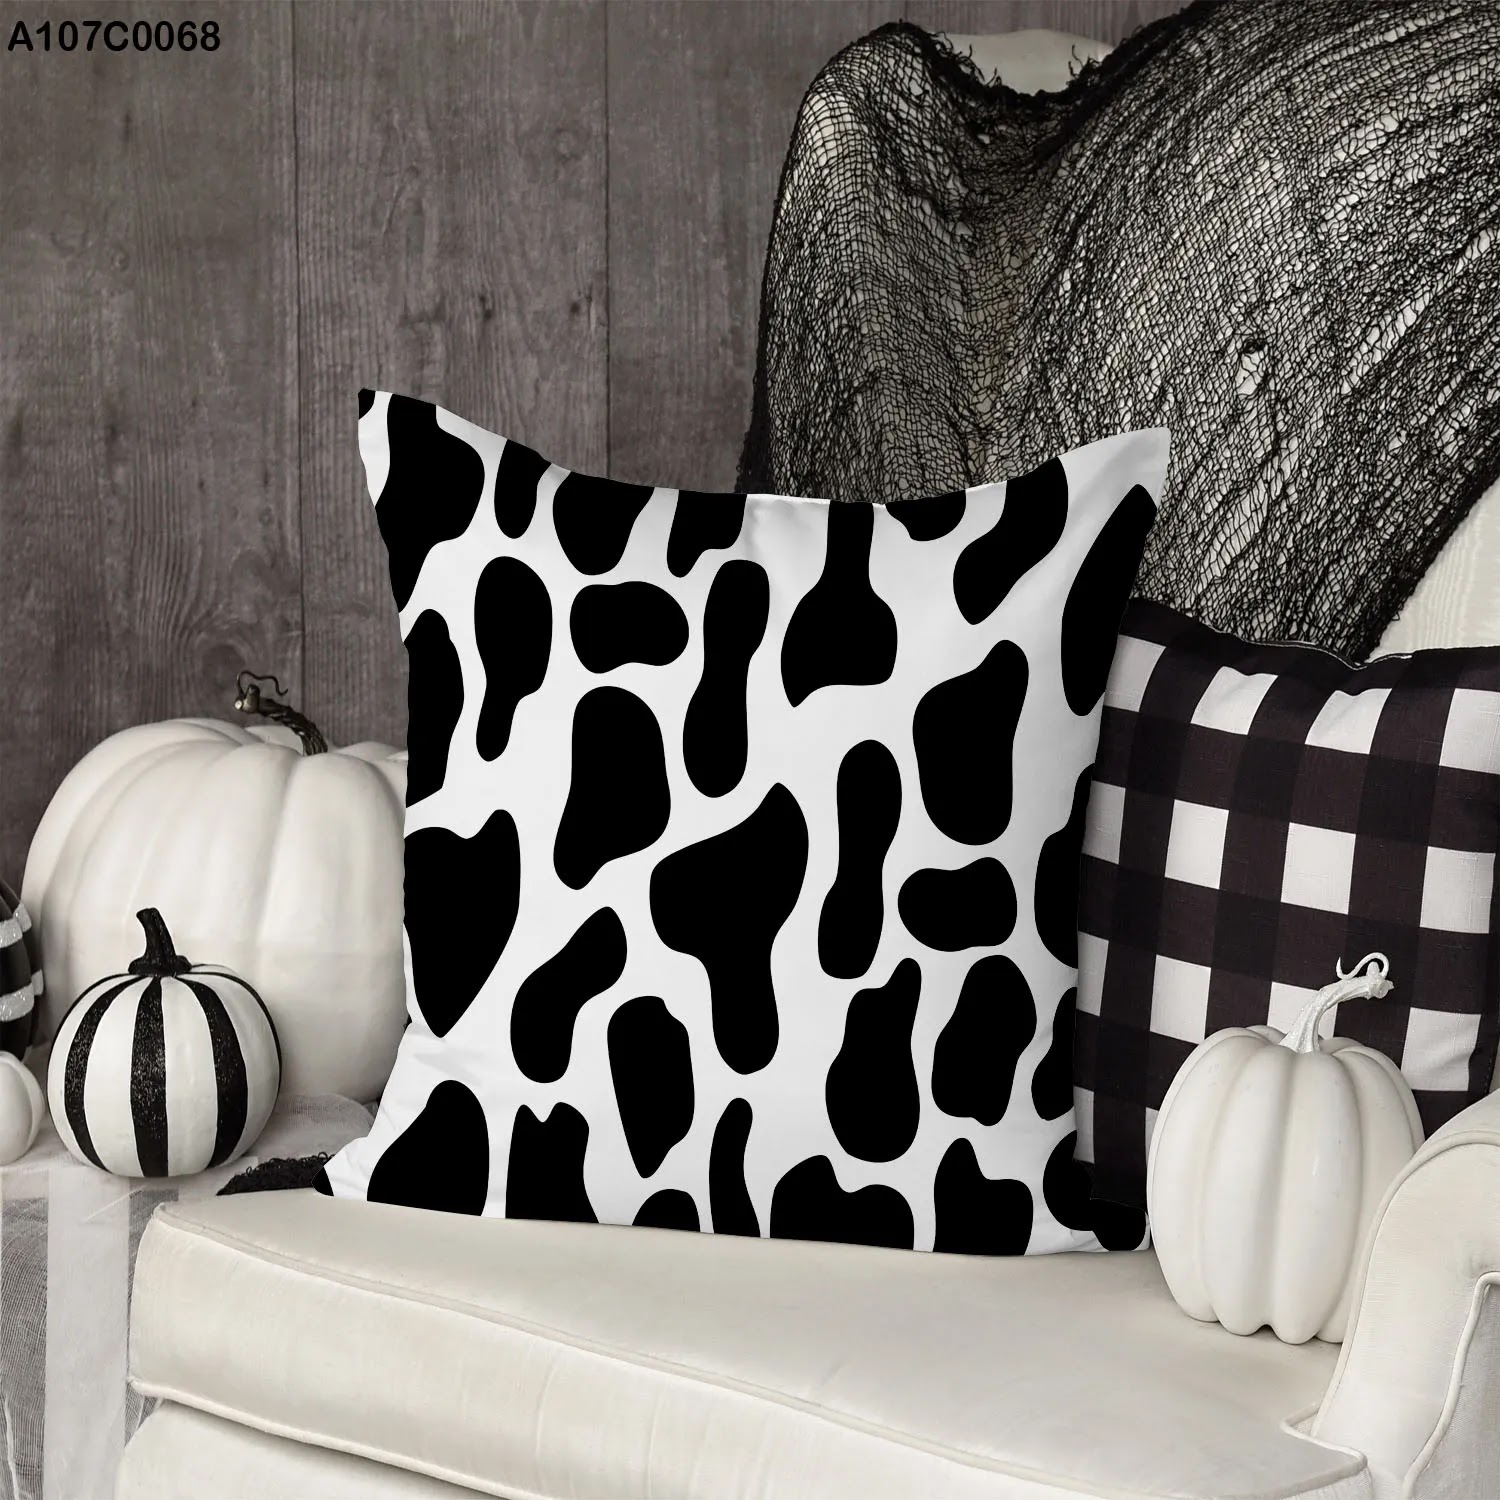 Pillow case with black & white cow skin pattern